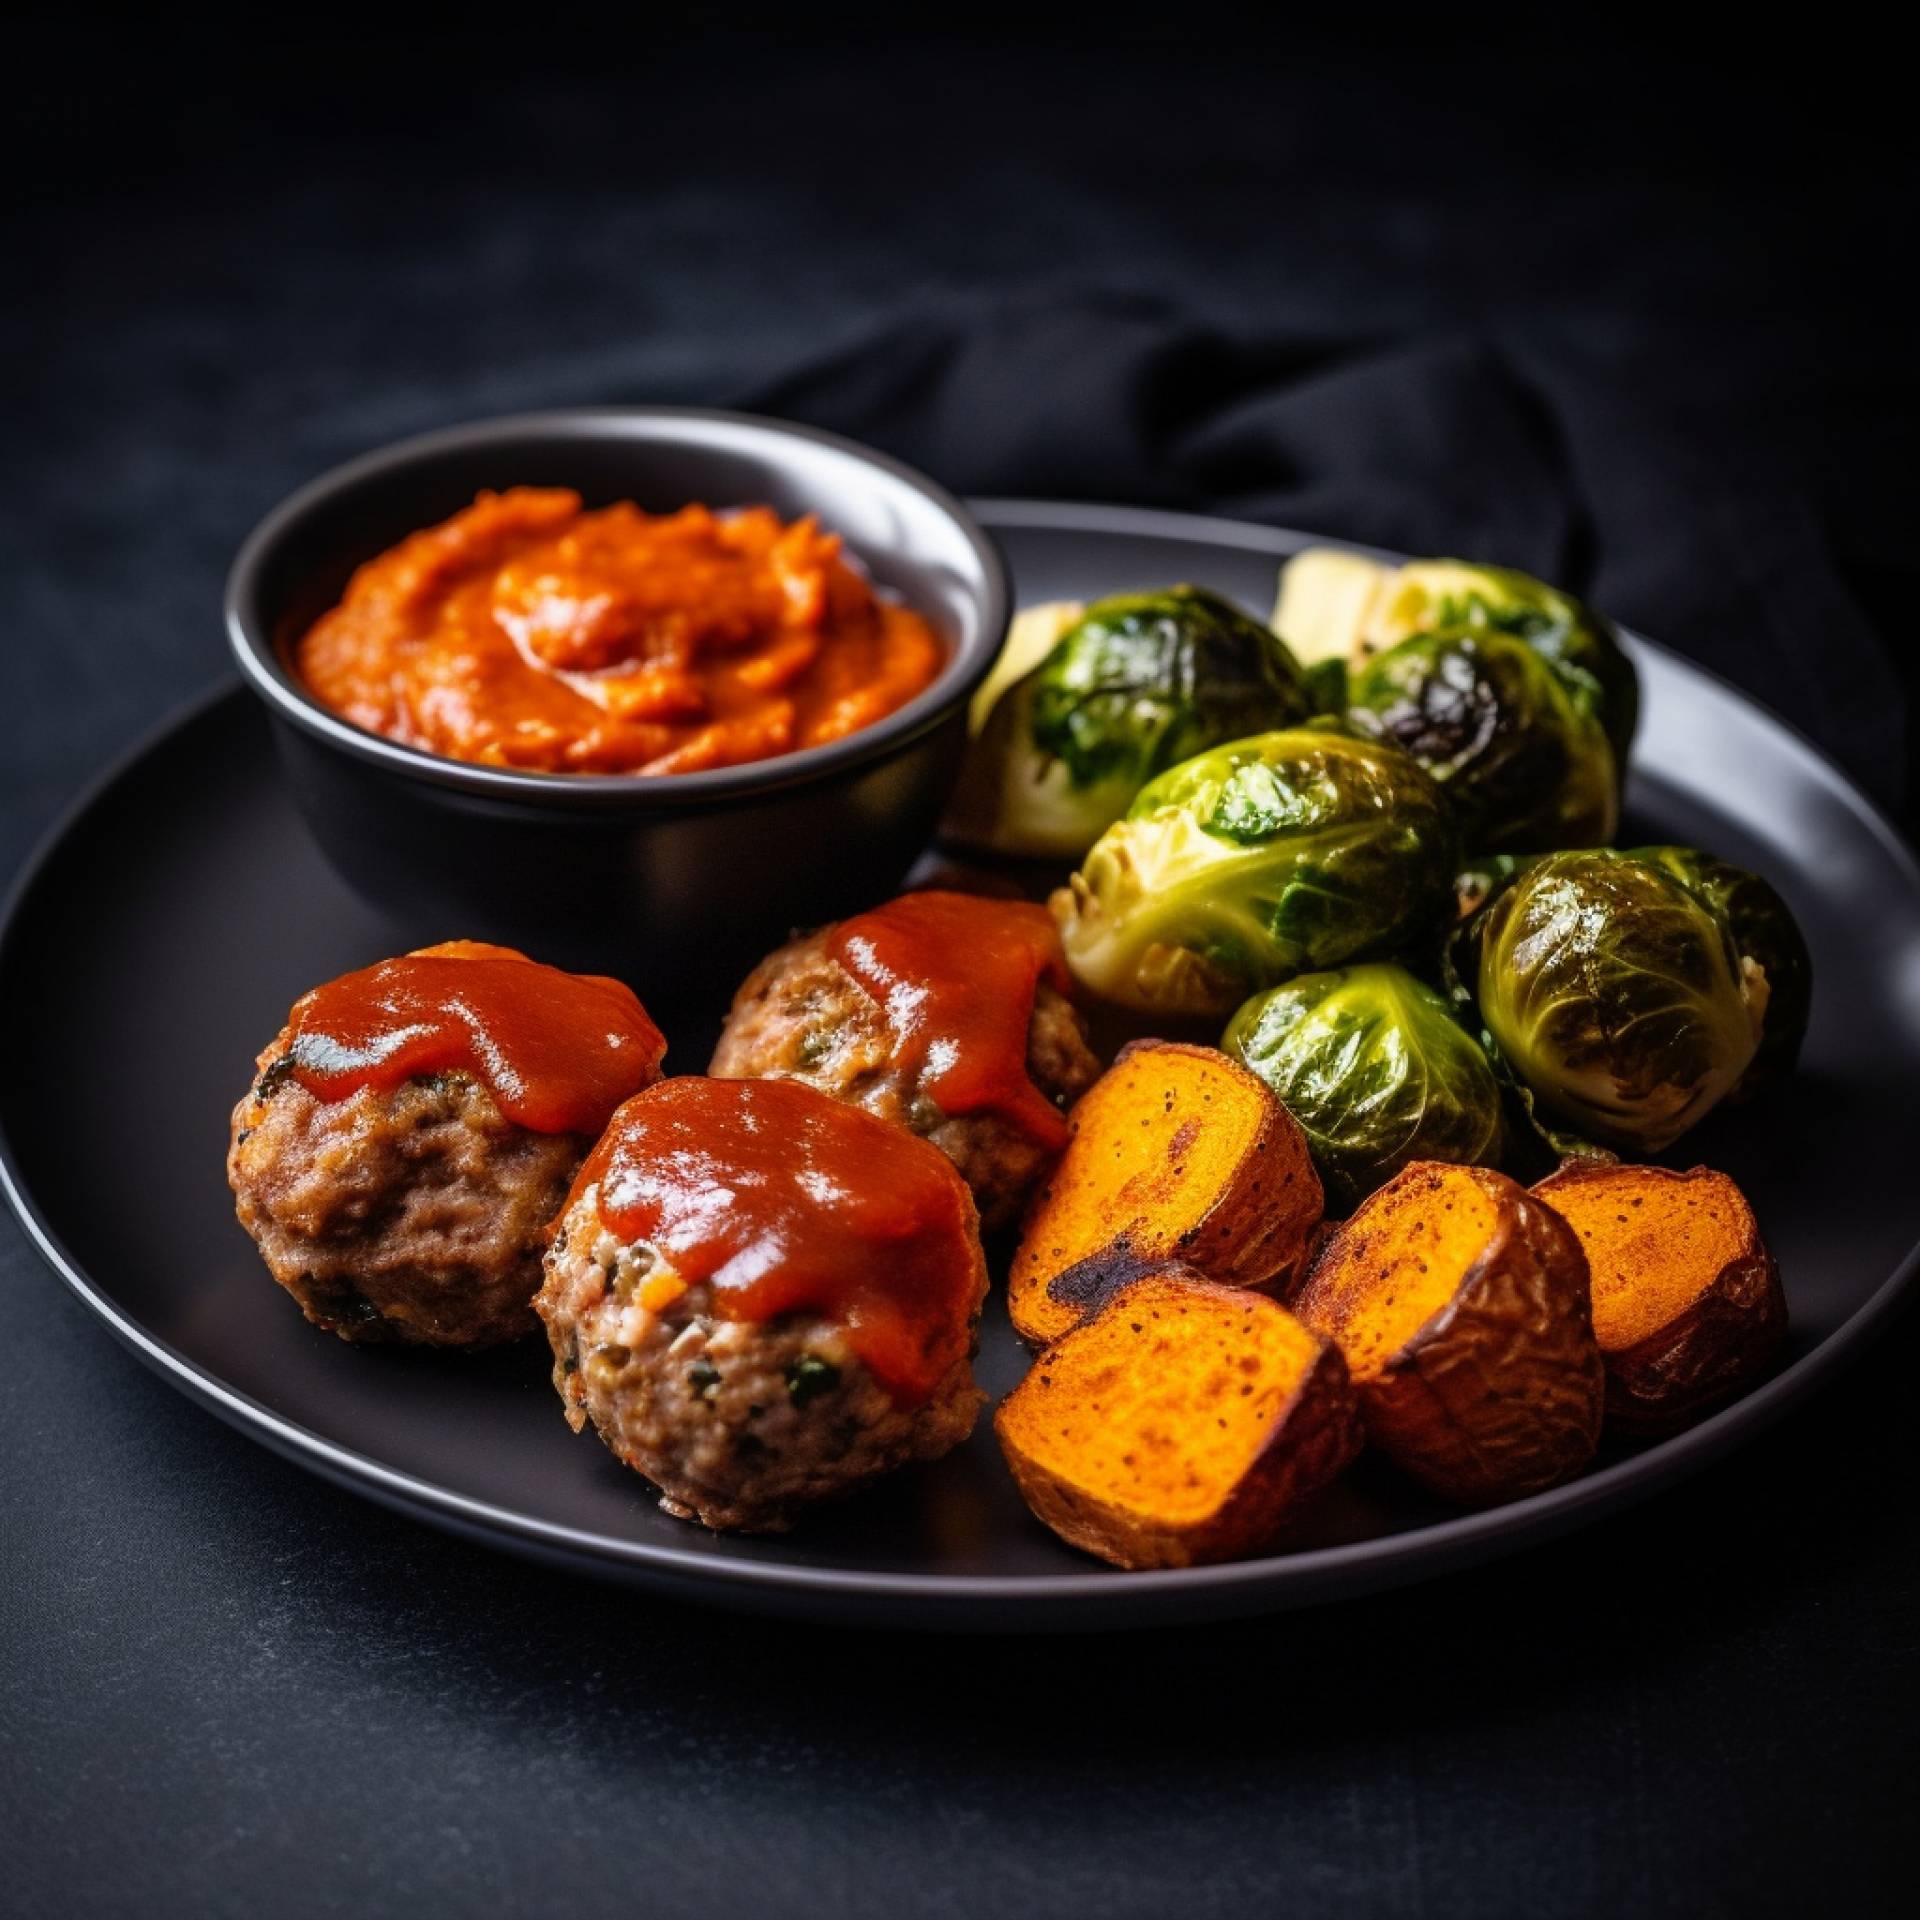 Southern BBQ Meatballs with Roasted Sweet Potatoes